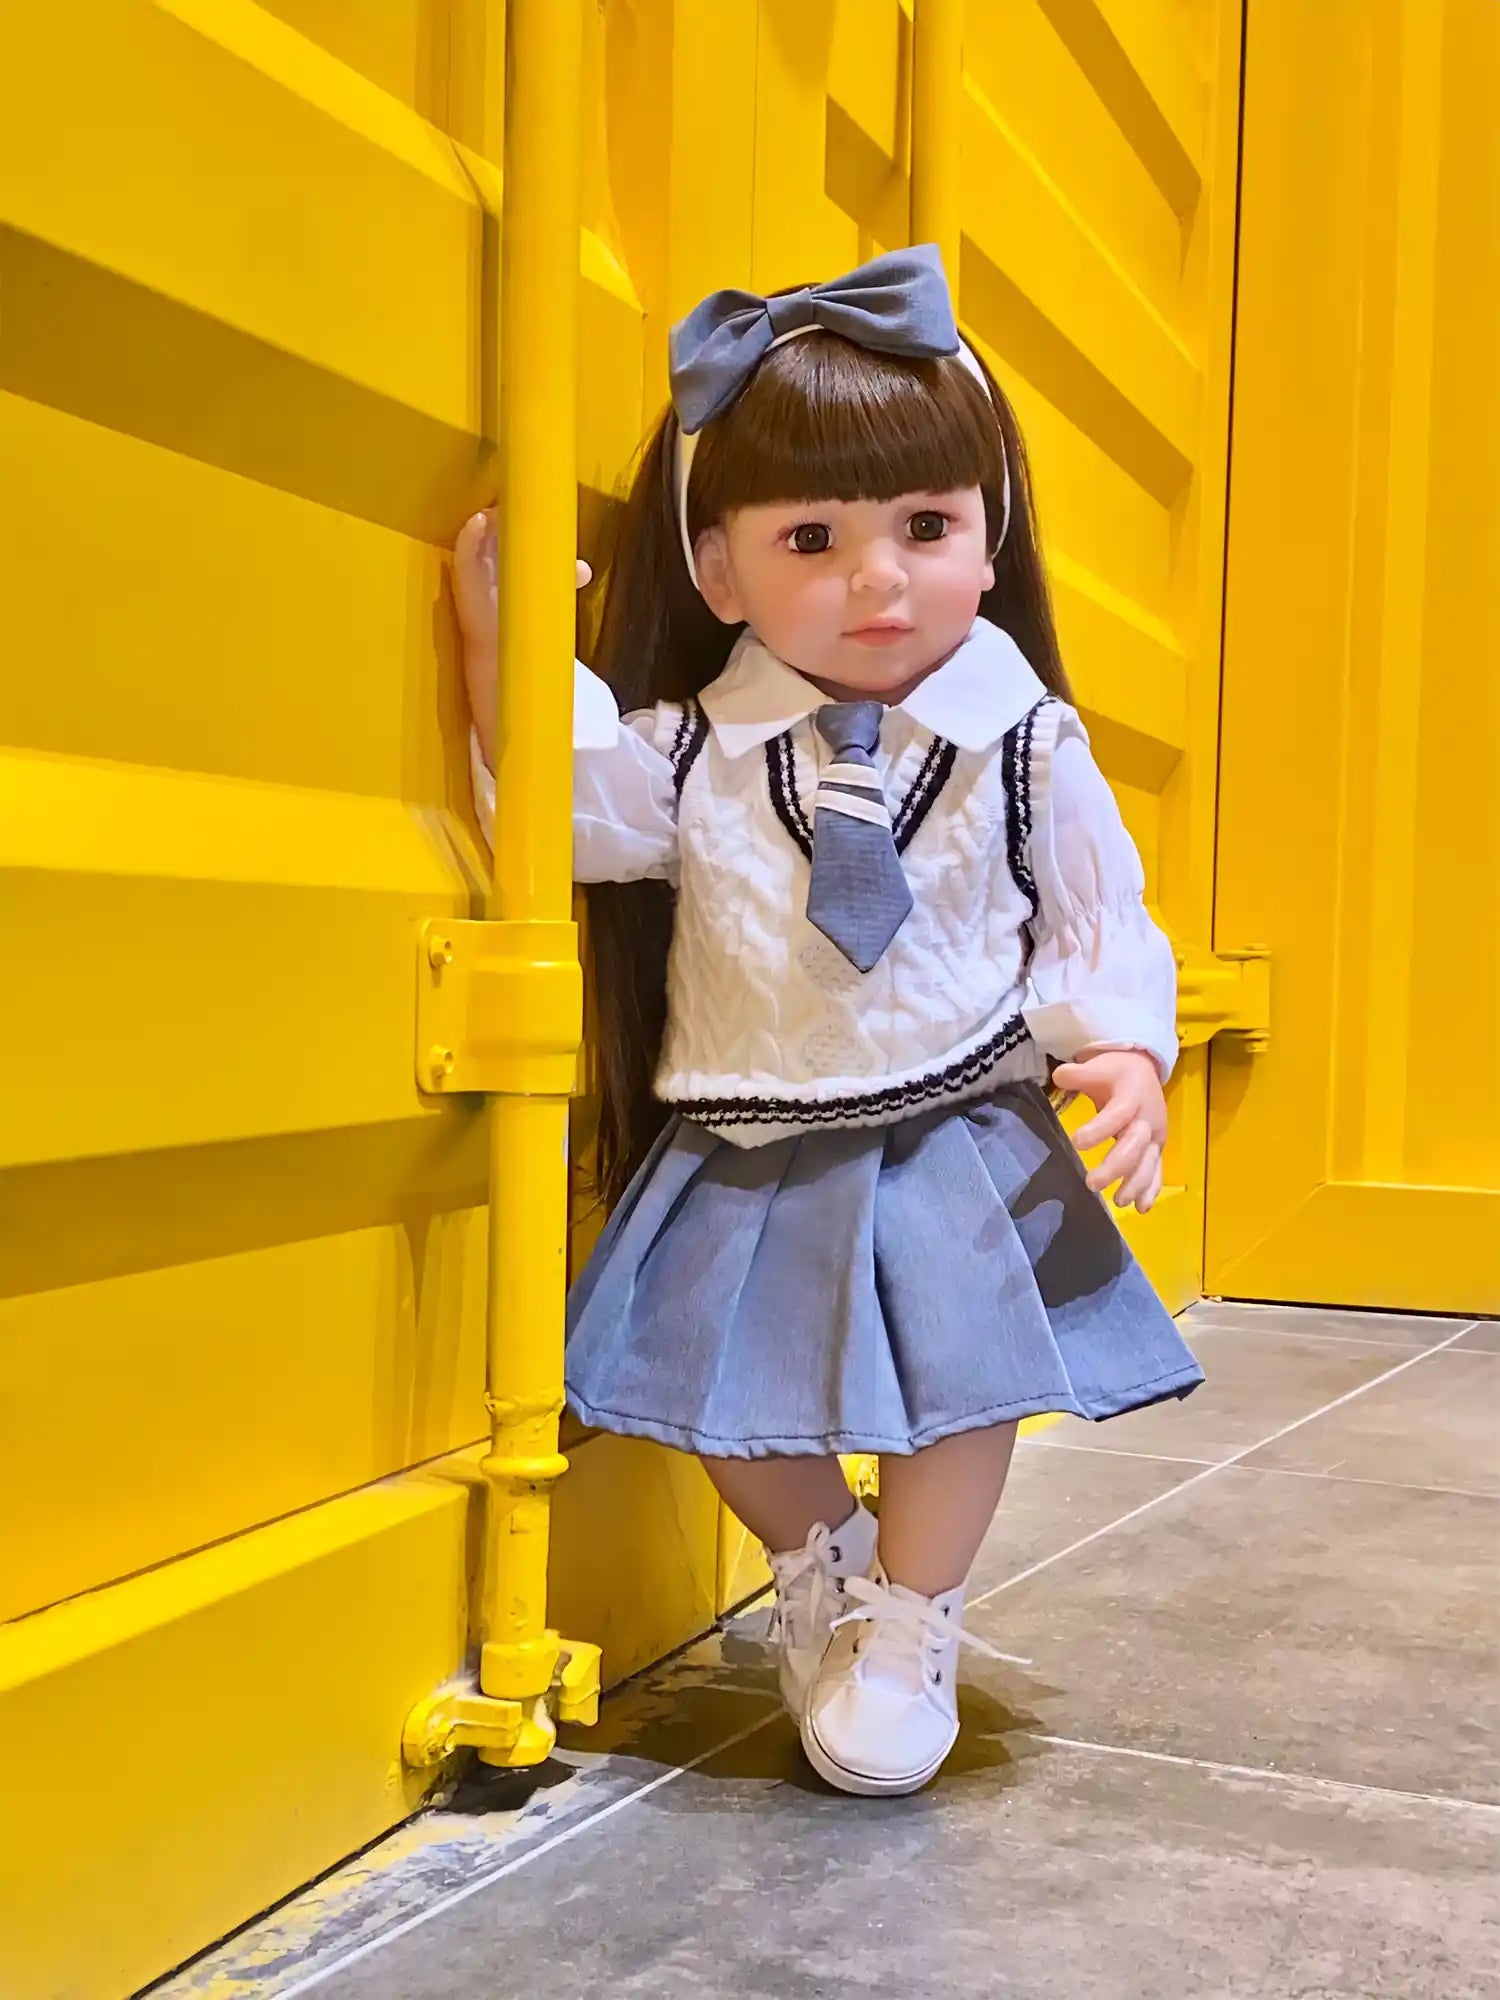 Lifelike toddler doll posed seated on a shiny floor, with a neatly styled hair, expressive eyes, and outfitted in a white blouse with a grey pinafore and a matching bow.